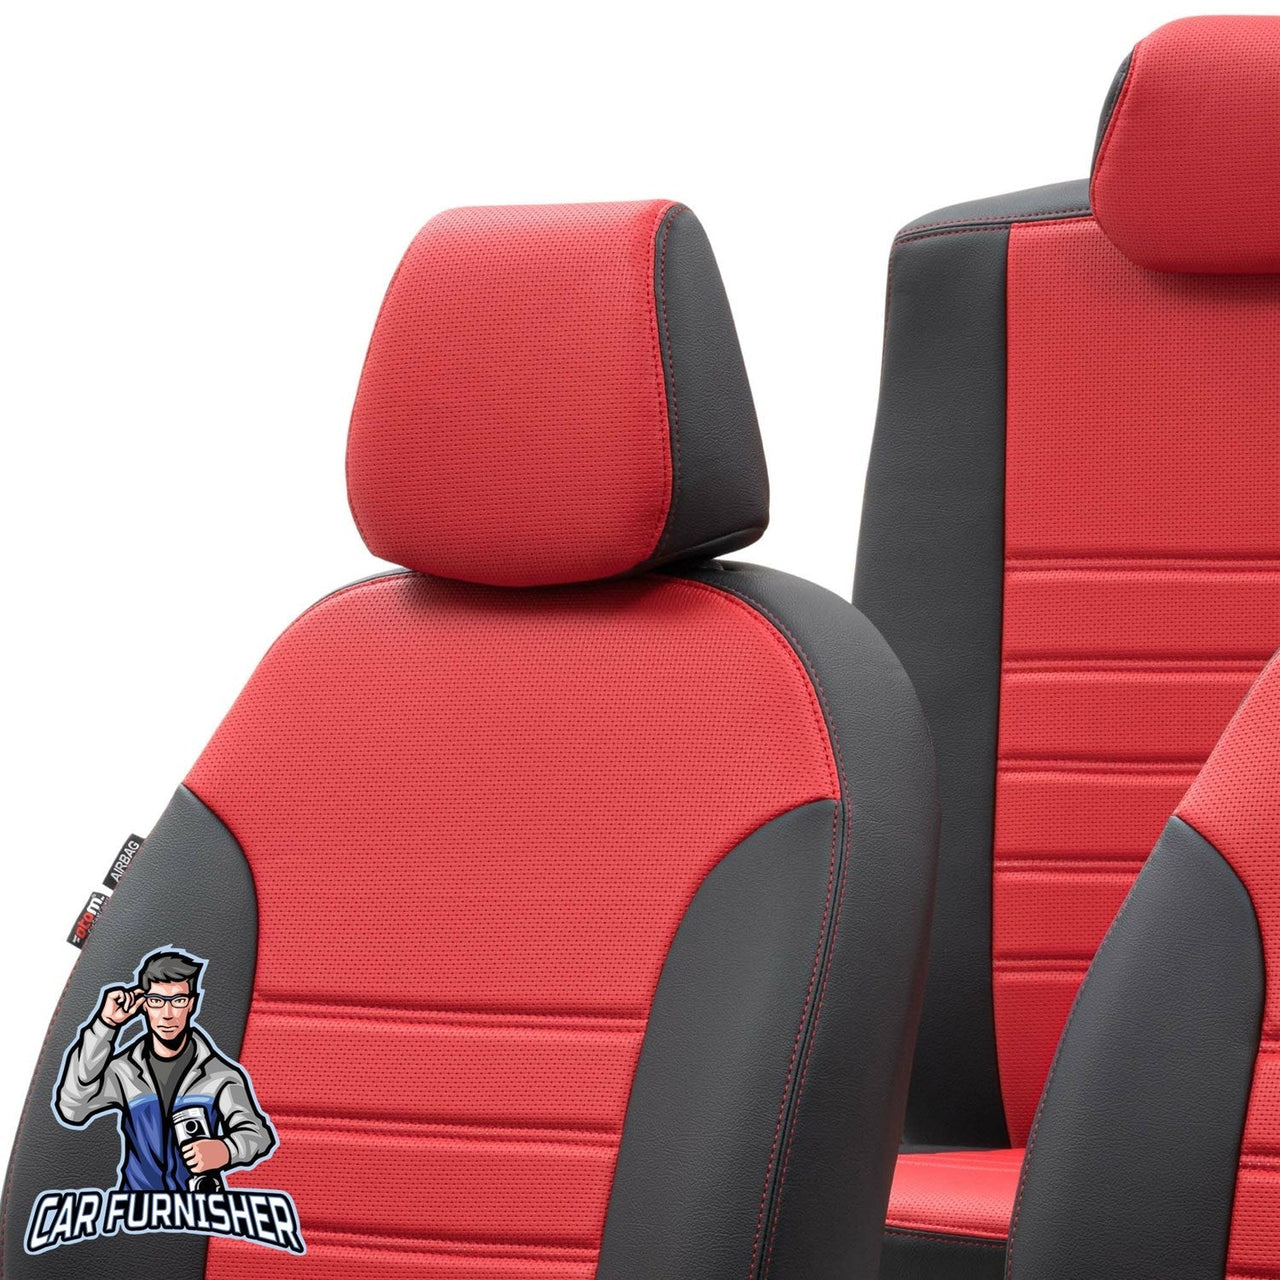 Audi A6 Seat Cover New York Leather Design Red Leather